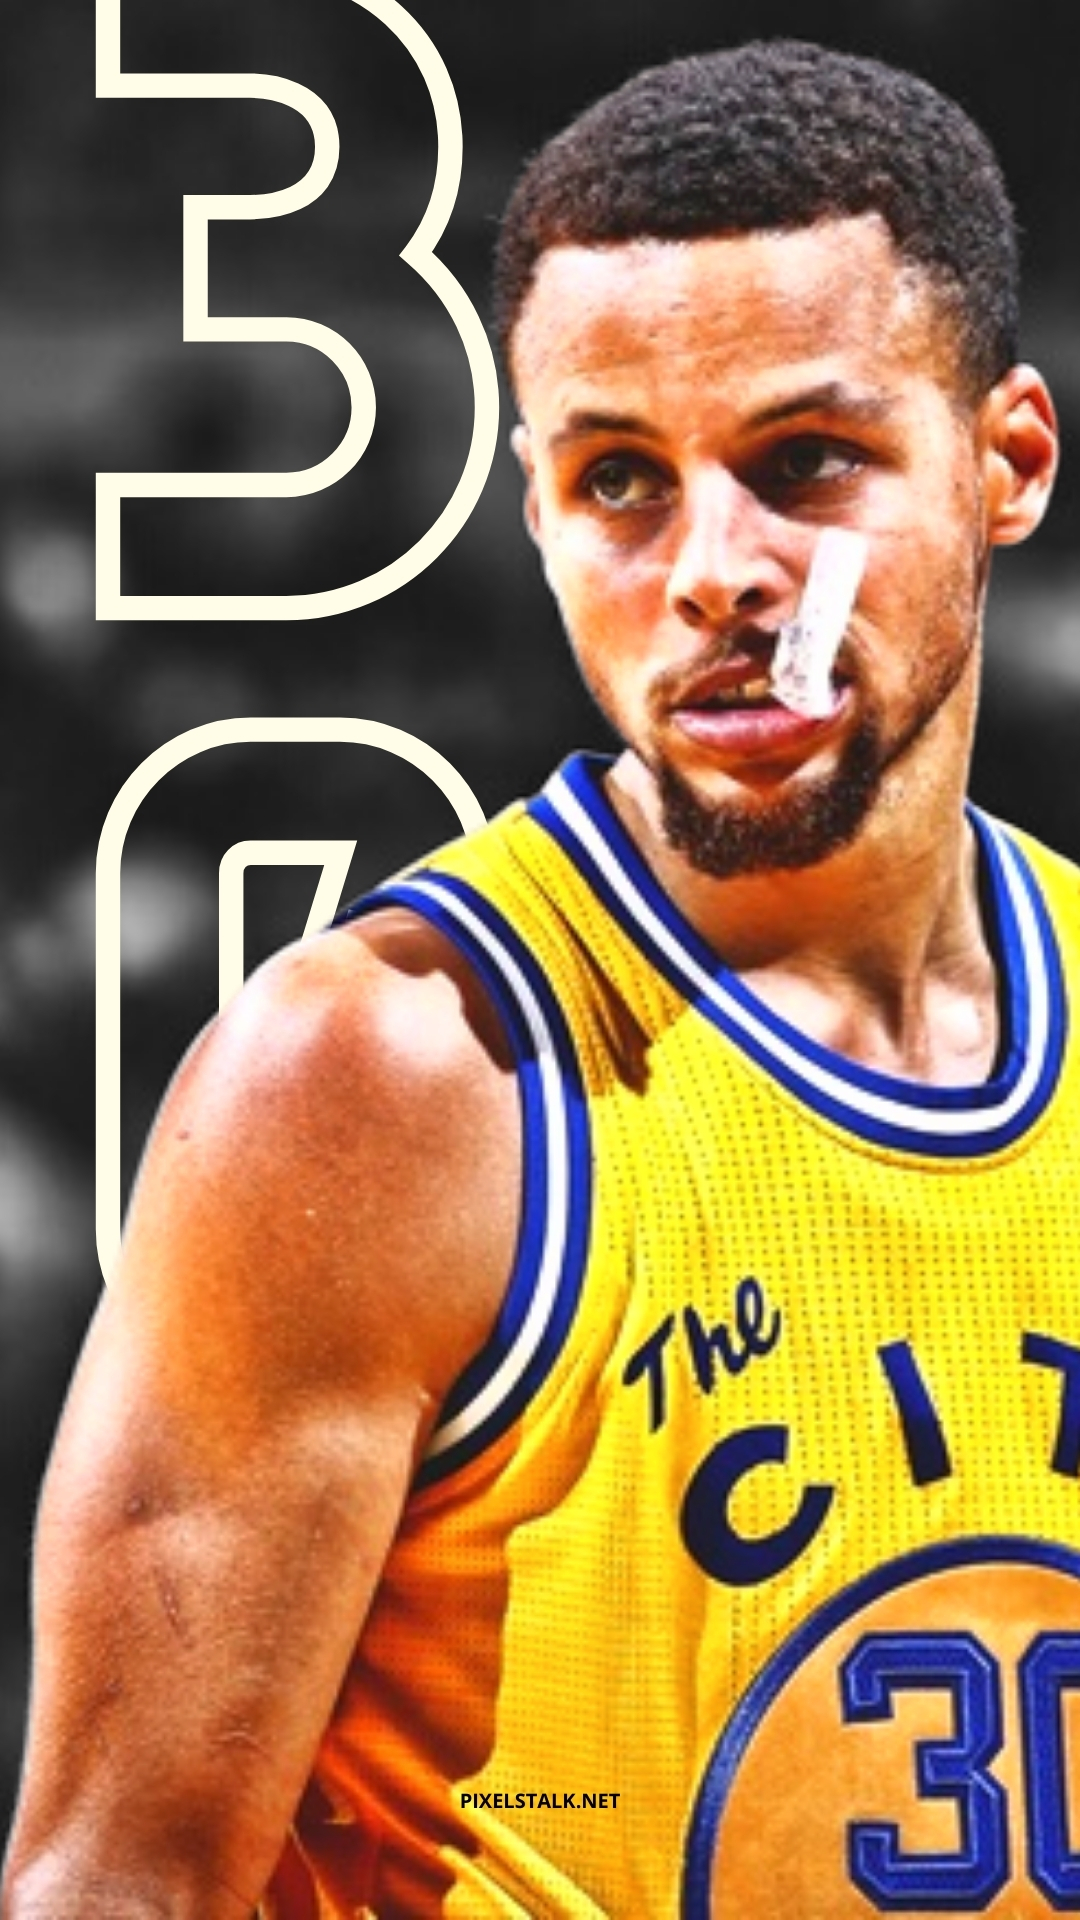 Chef Curry on Twitter Stephen Curry free wallpapers Pt2  httpstcoUfcga3SCbD  Twitter